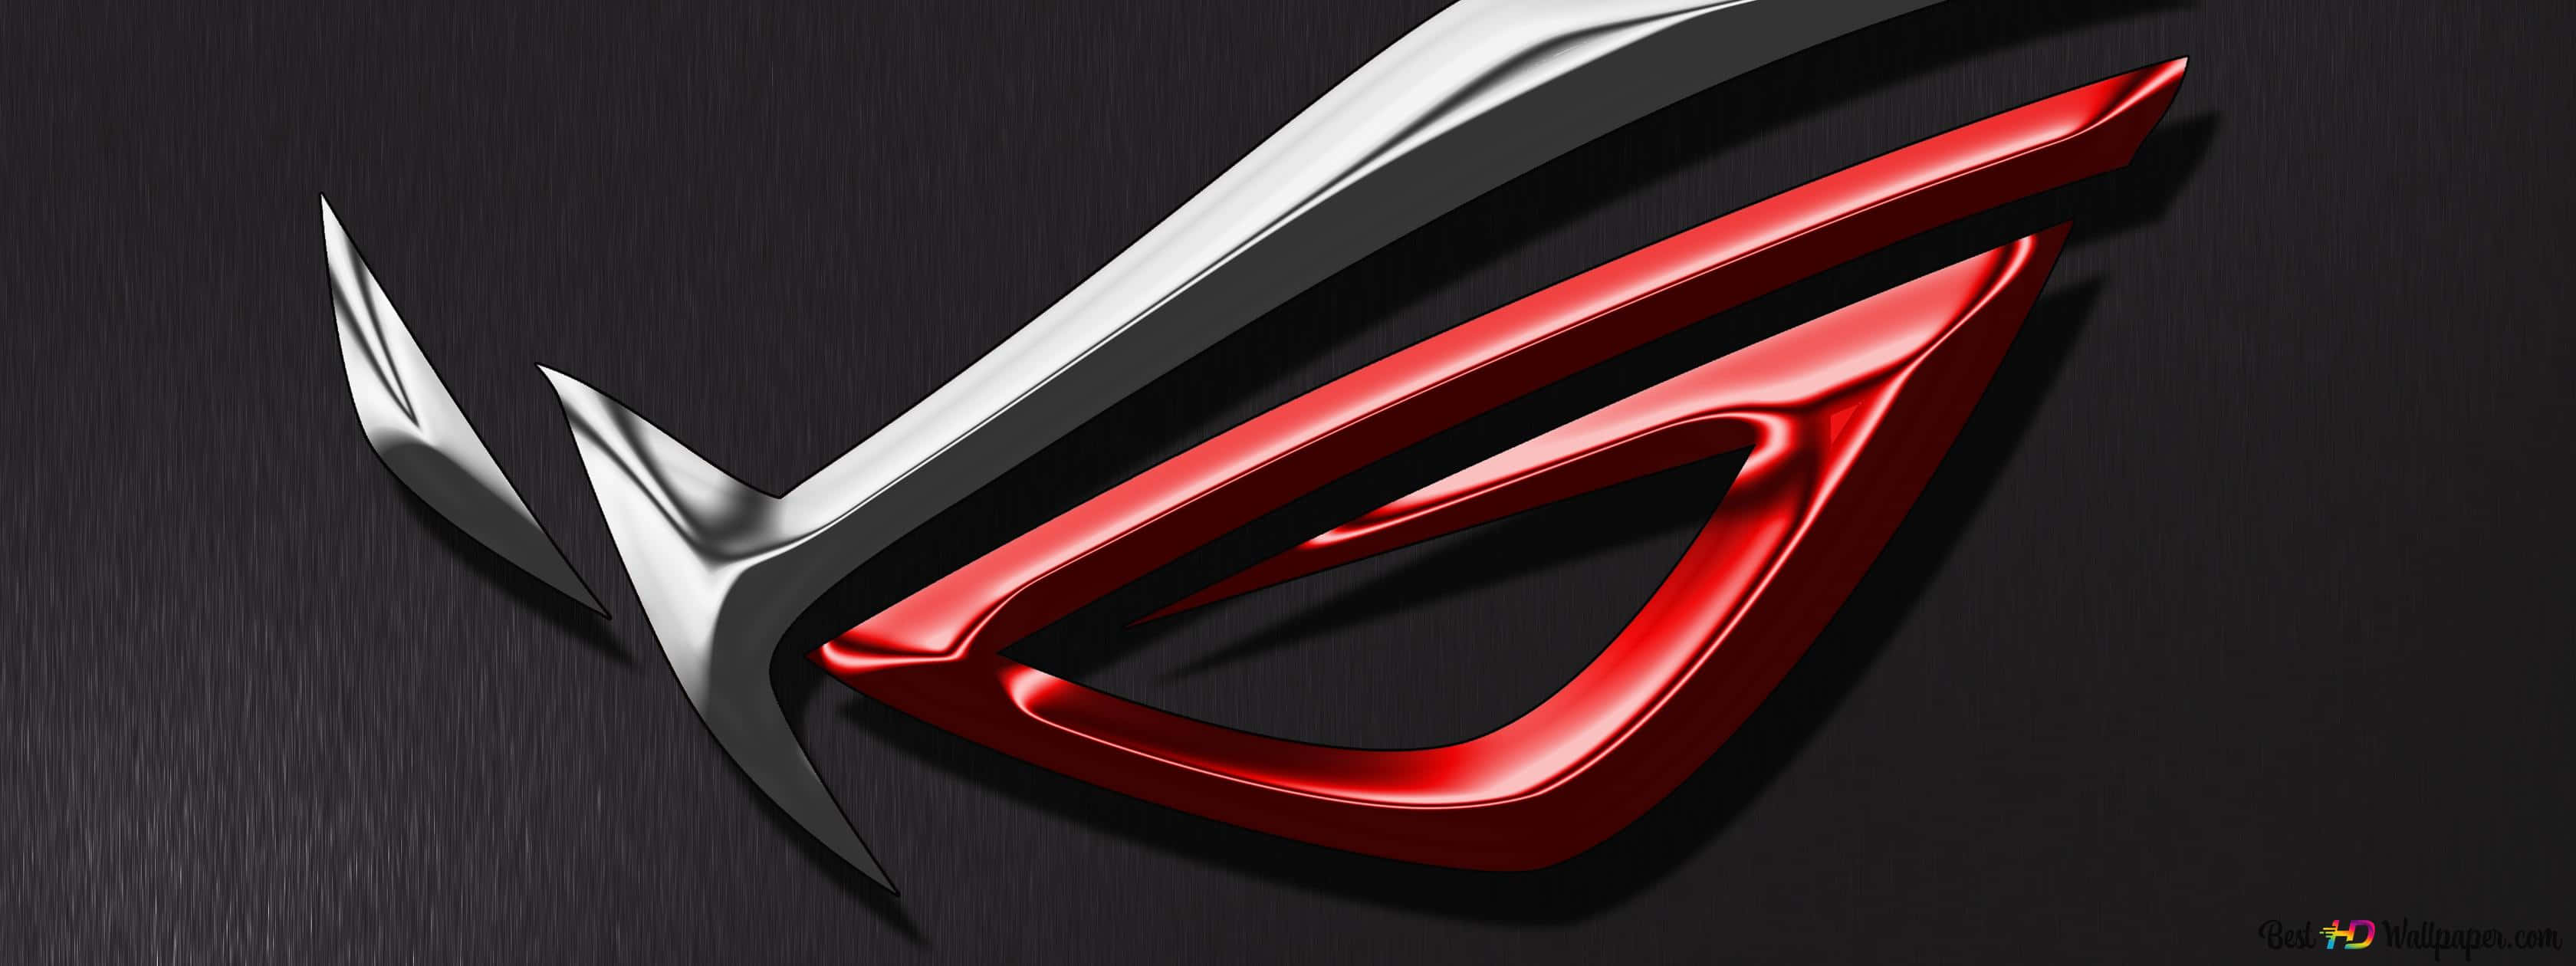 Unleash your Gaming Edge with ROG from ASUS